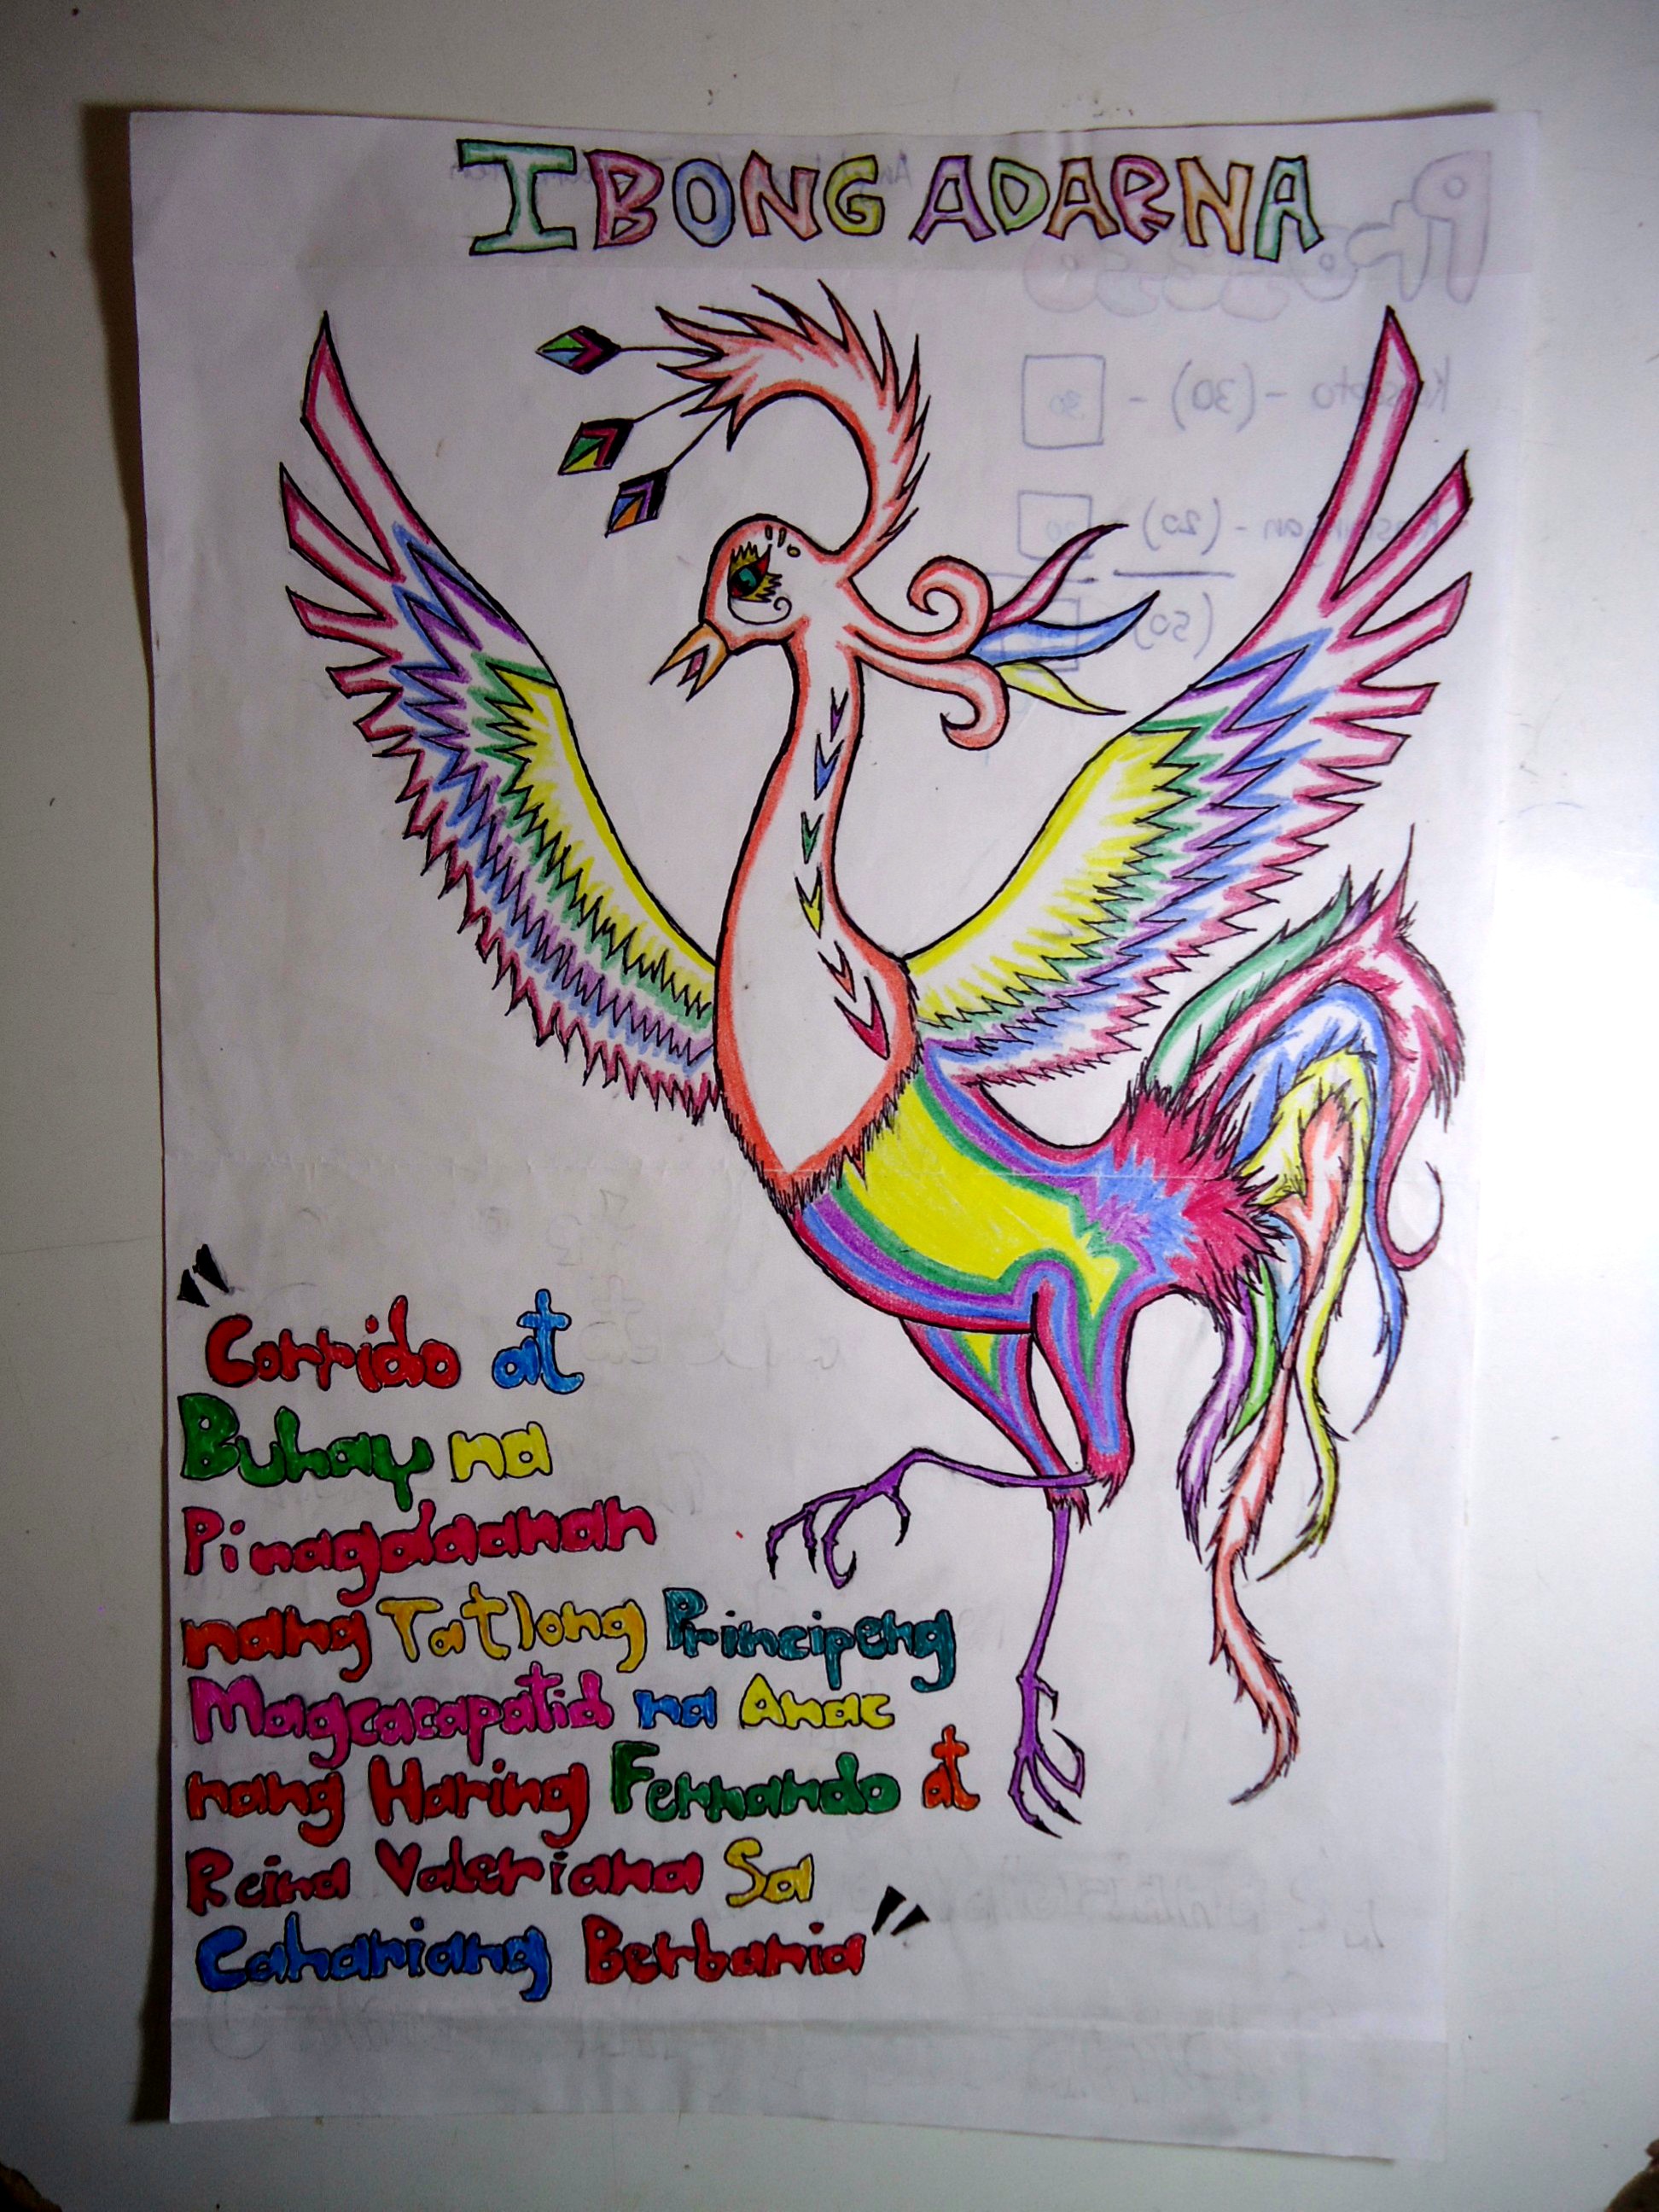 The Ibong Adarna - MY STYLE! by Skitzious on DeviantArt